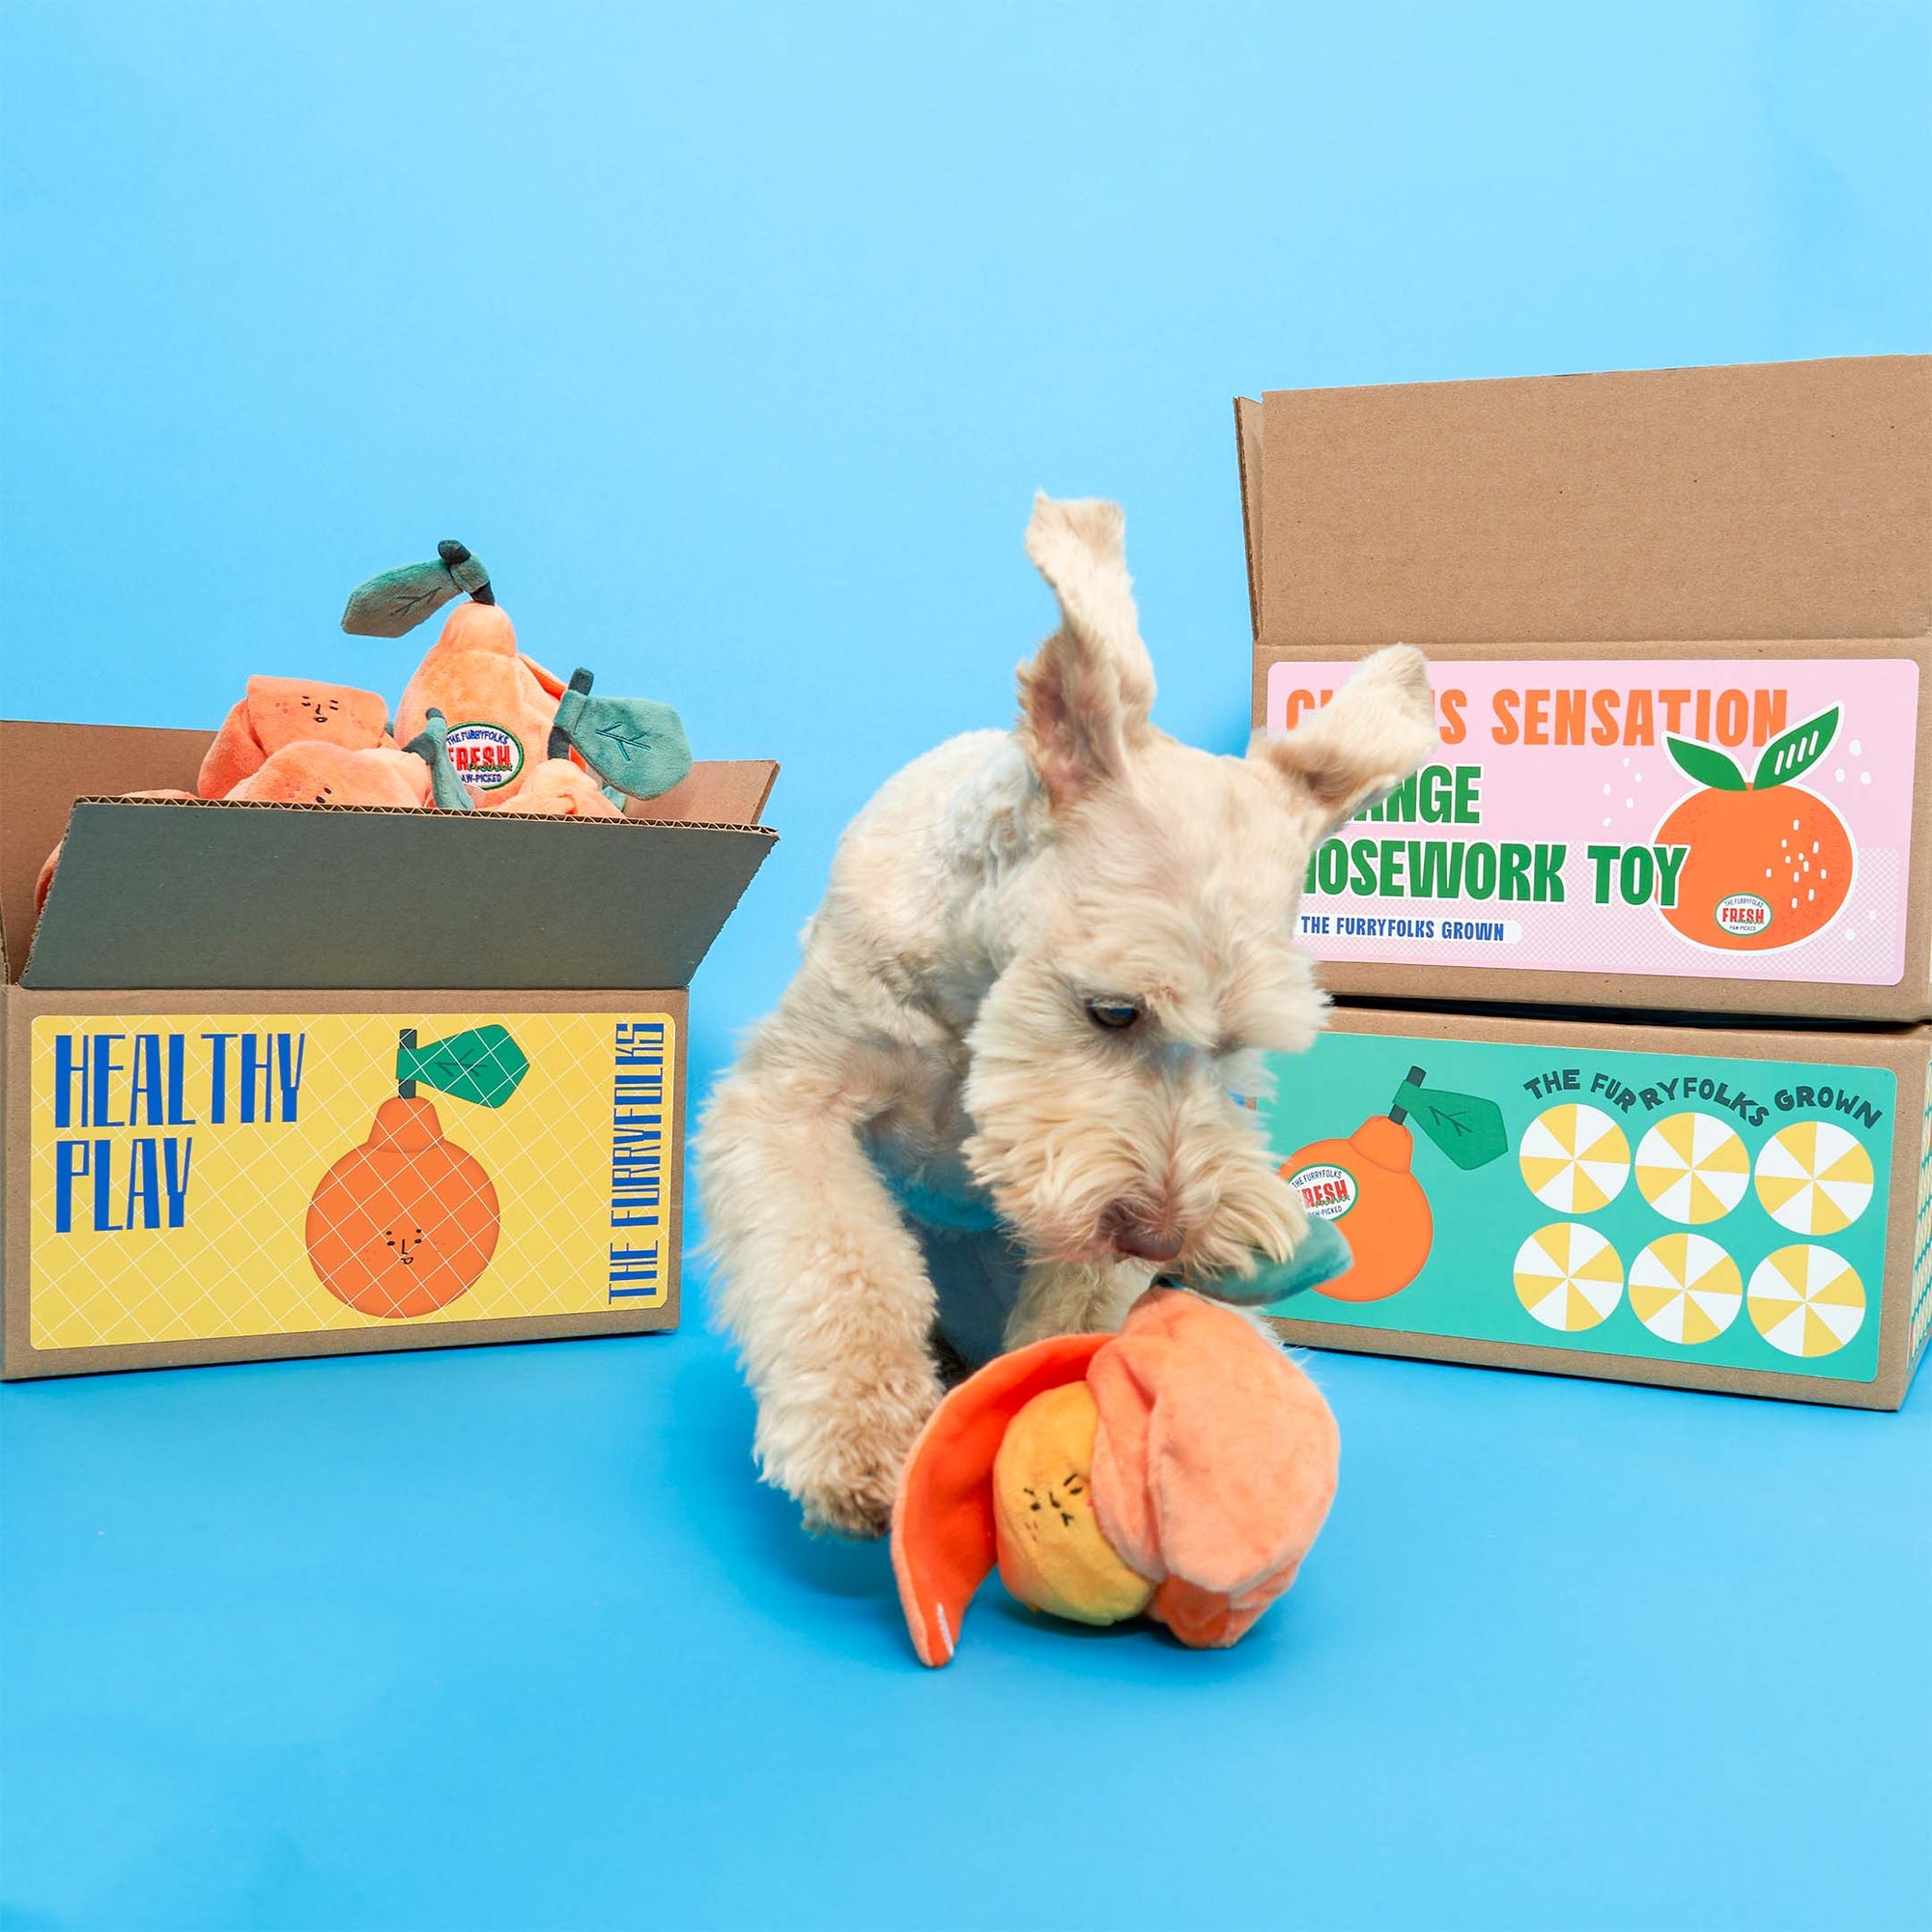  A white dog with one ear up is engaging with an orange-shaped dog toy on a blue background. In the background, there are cardboard boxes labeled "Healthy Play" and "Citrus Sensation Orange Nosework Toy by The Furryfolks Grown".